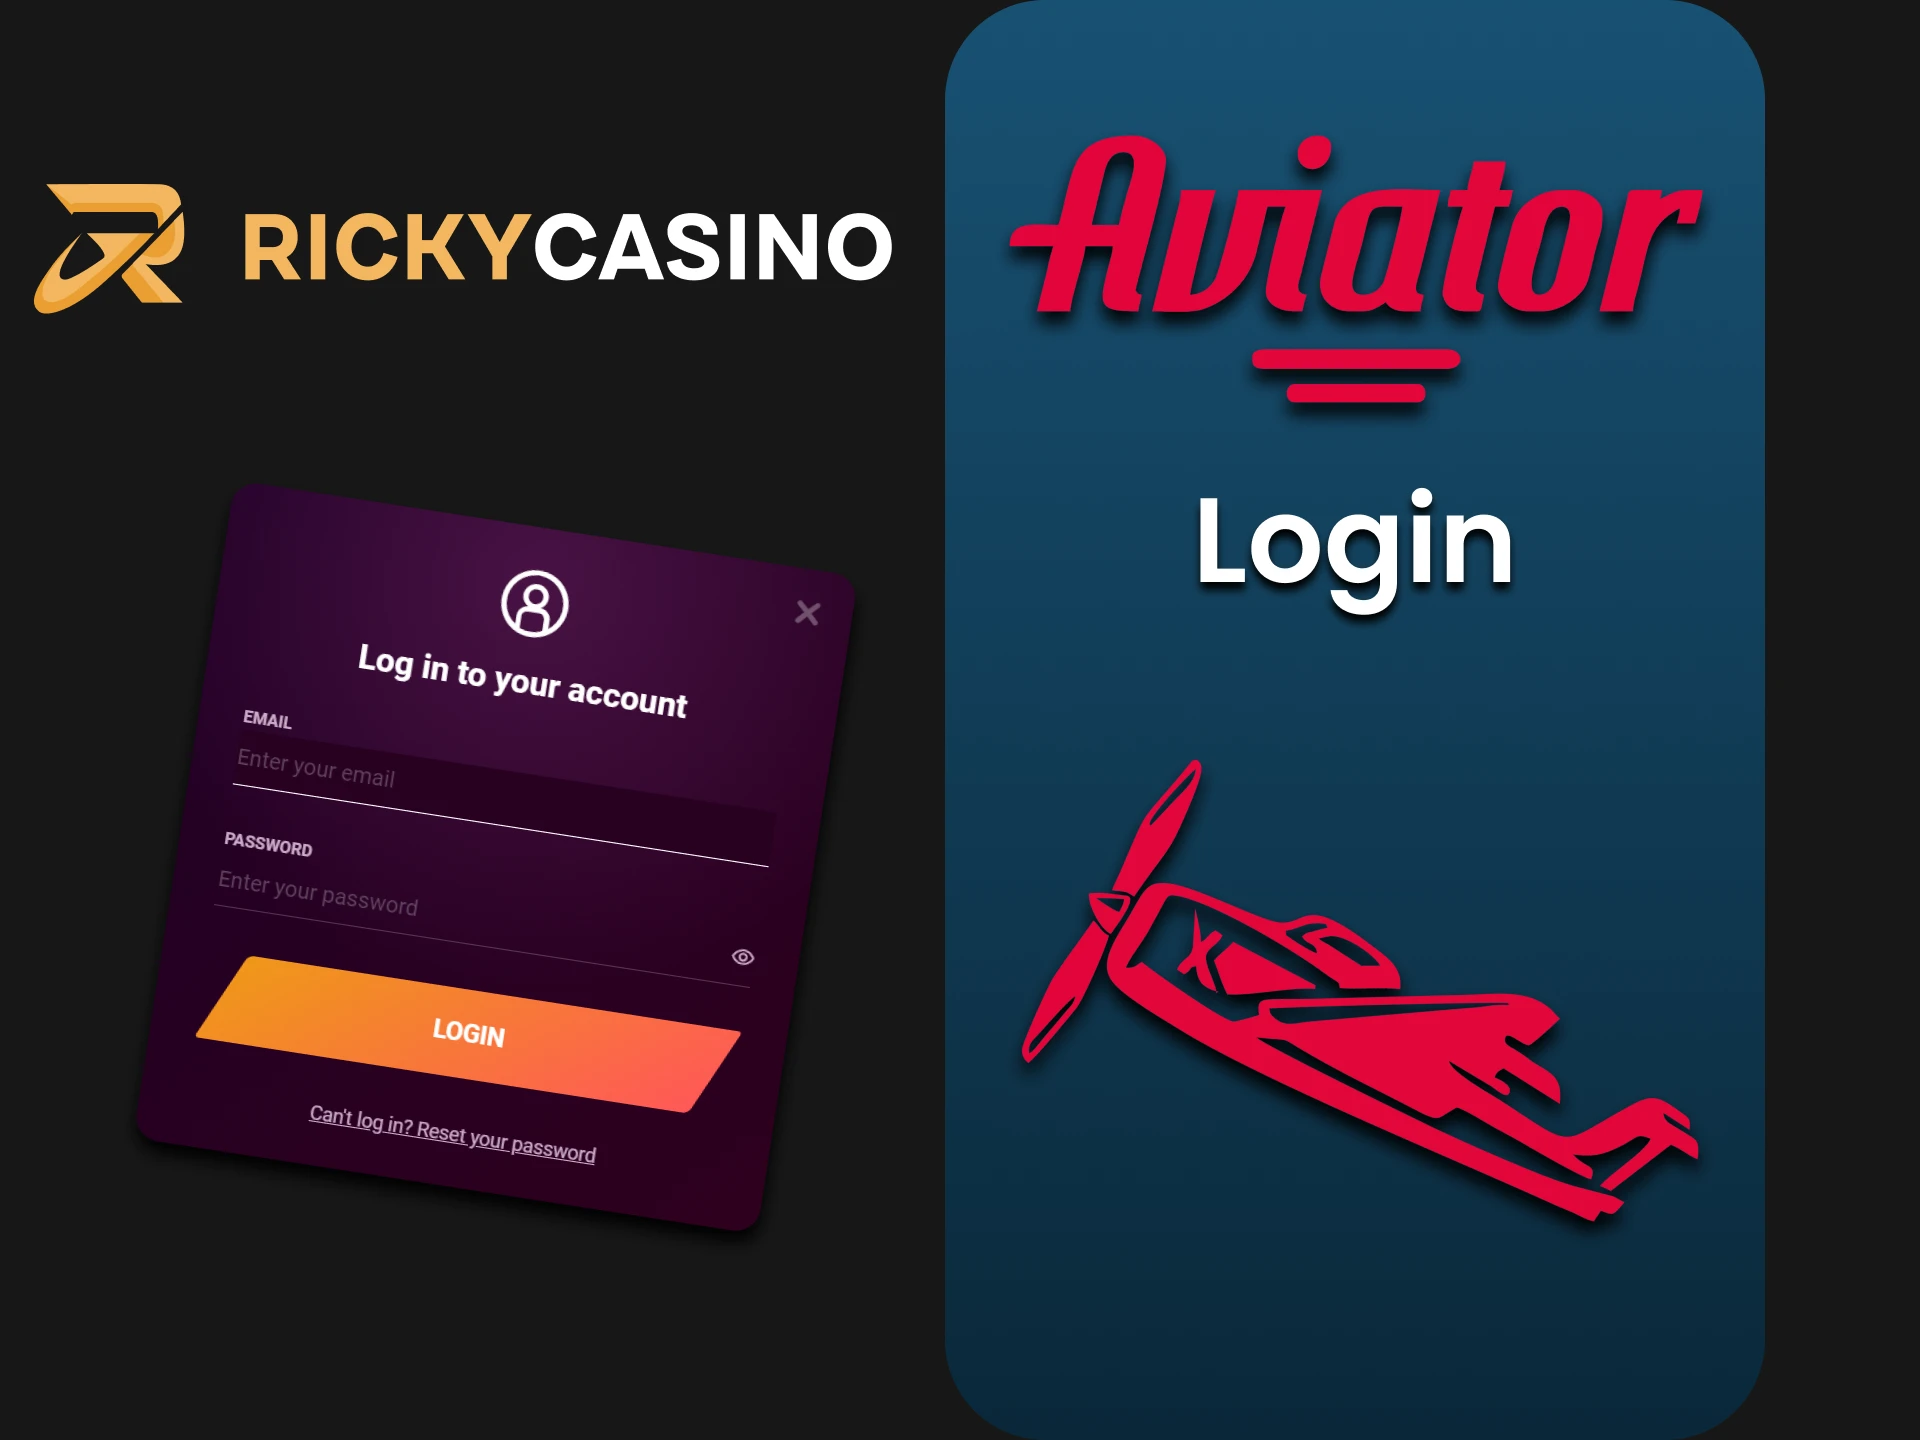 By logging into your Ricky Casino account you can play Aviator.